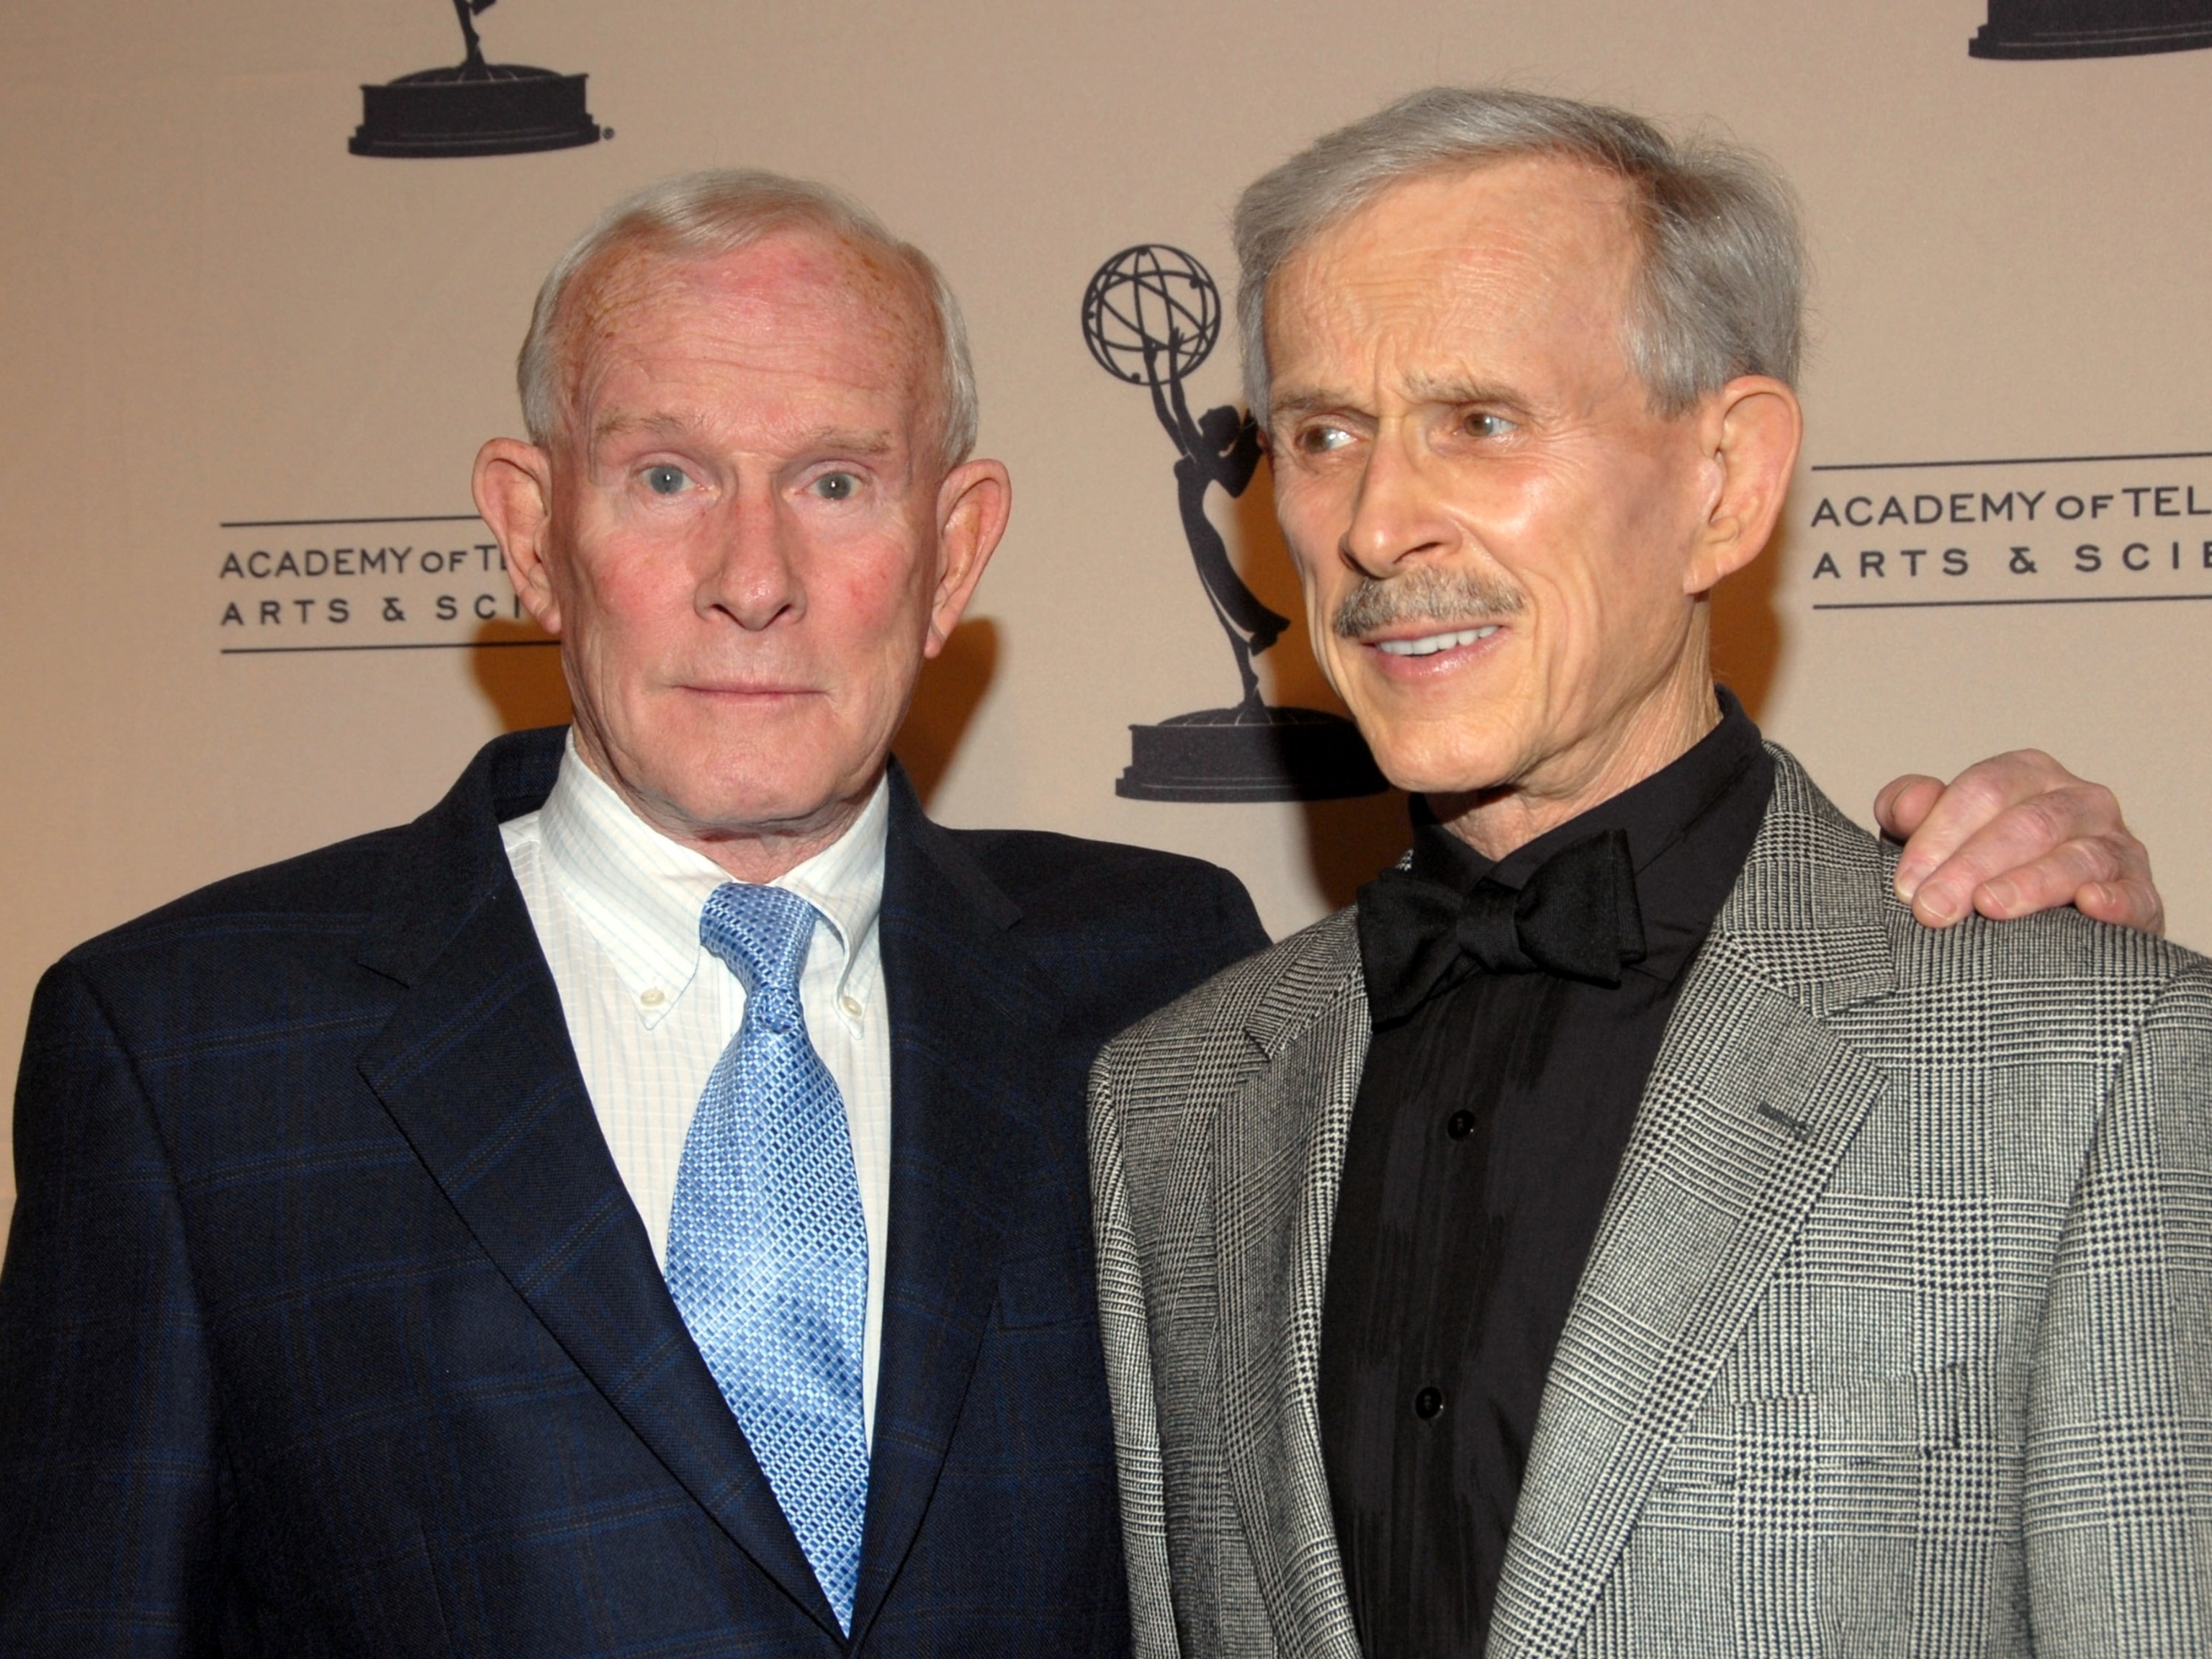 PHOTO: Comedians Tom Smothers and Dick Smothers arrive for the Academy Of Television Arts and Sciences' 19th Annual Hall Of Fame Induction Gala held at Beverly Hills Hotel on January 20, 2010 in Beverly Hills, California.